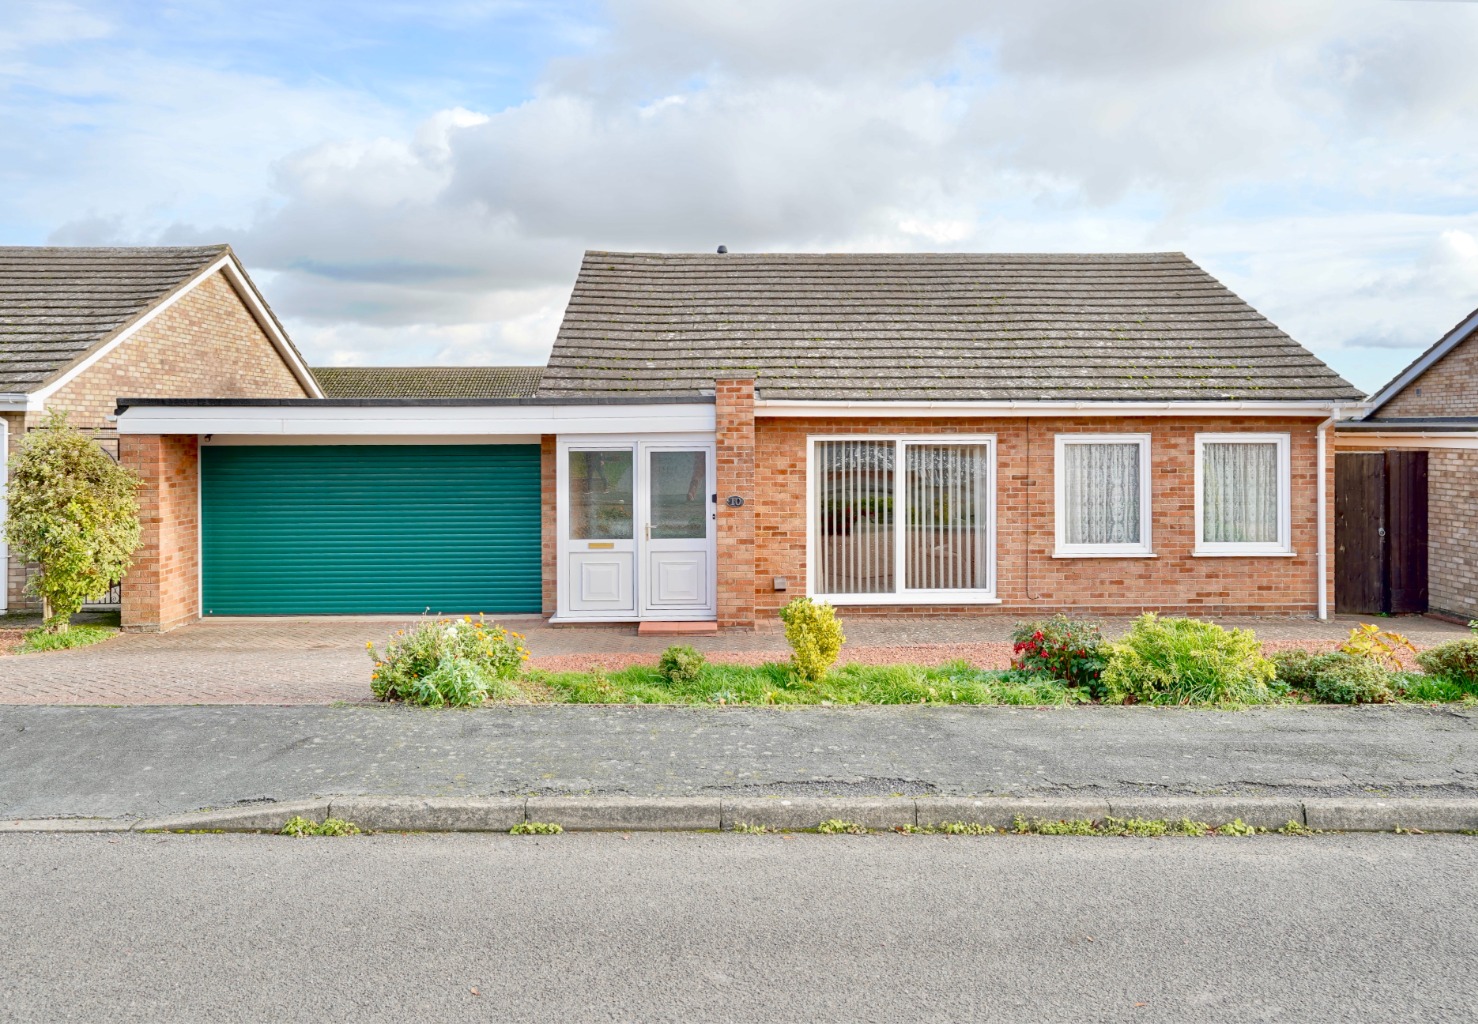 3 bed bungalow for sale in Corunna Close, St. Neots - Property Image 1